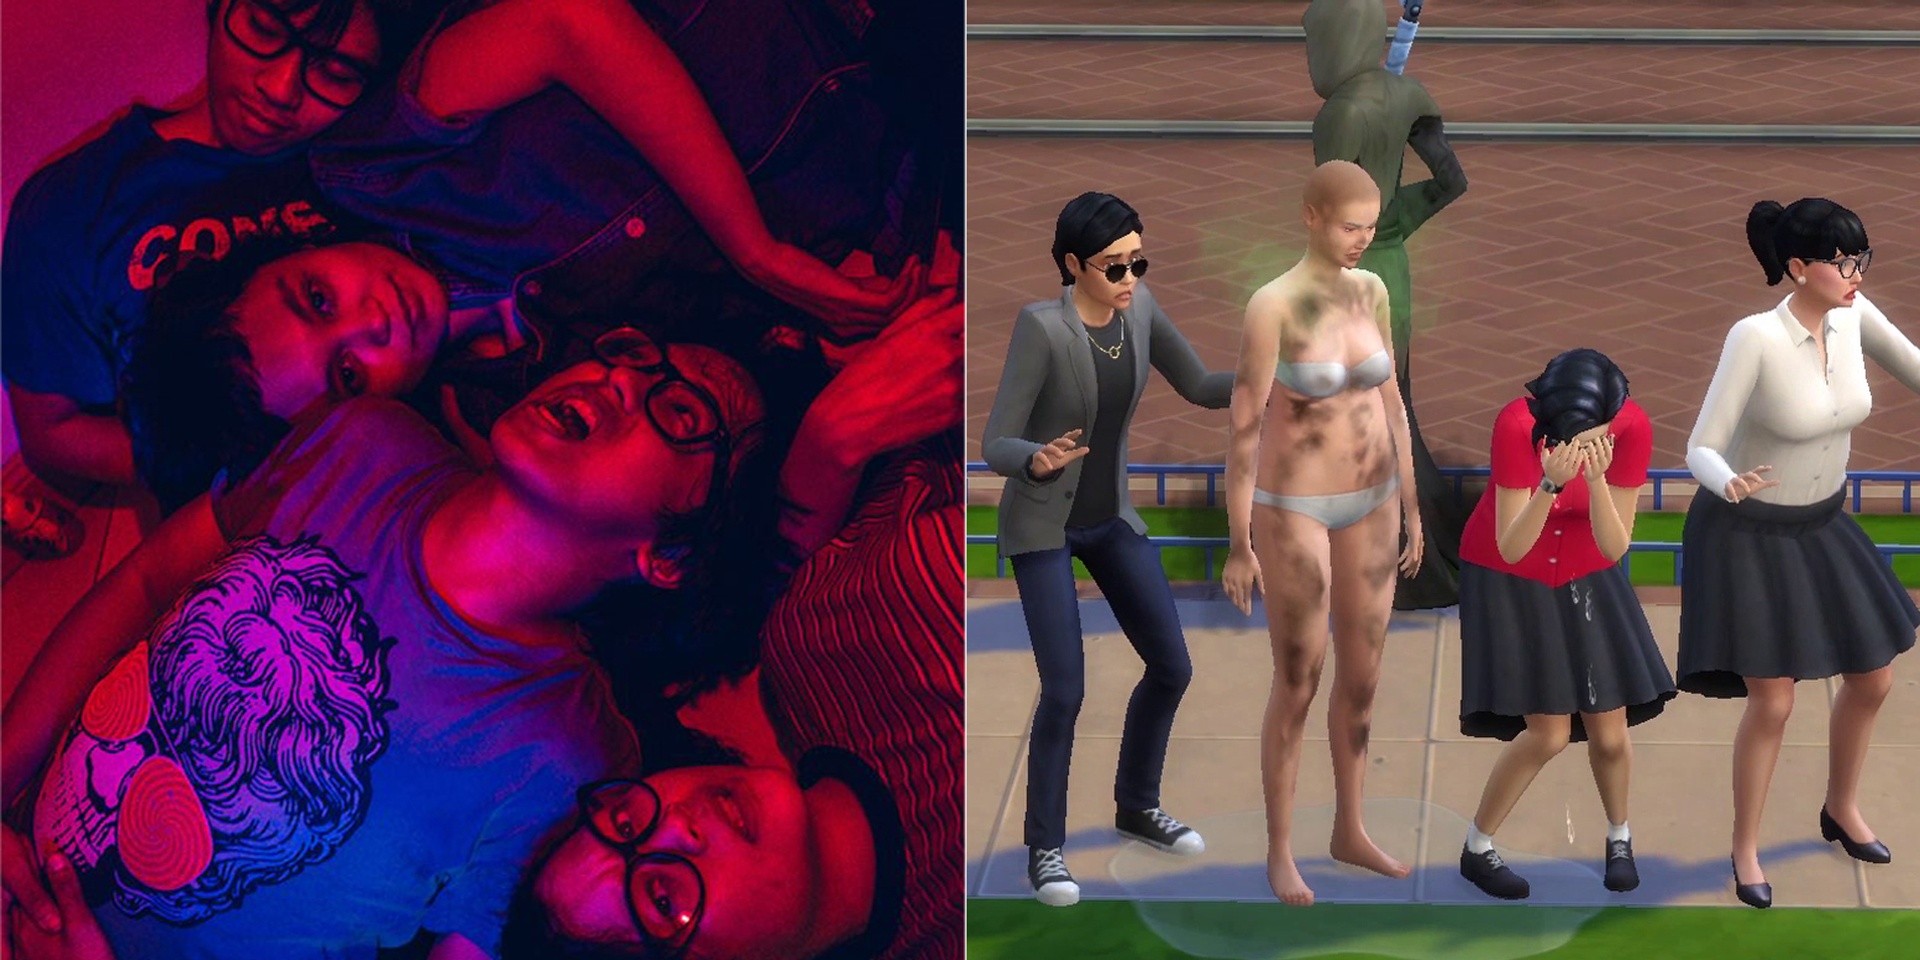 Behind the Lens: The Buildings talk shooting 'Flesh and Code' music video on The Sims – watch